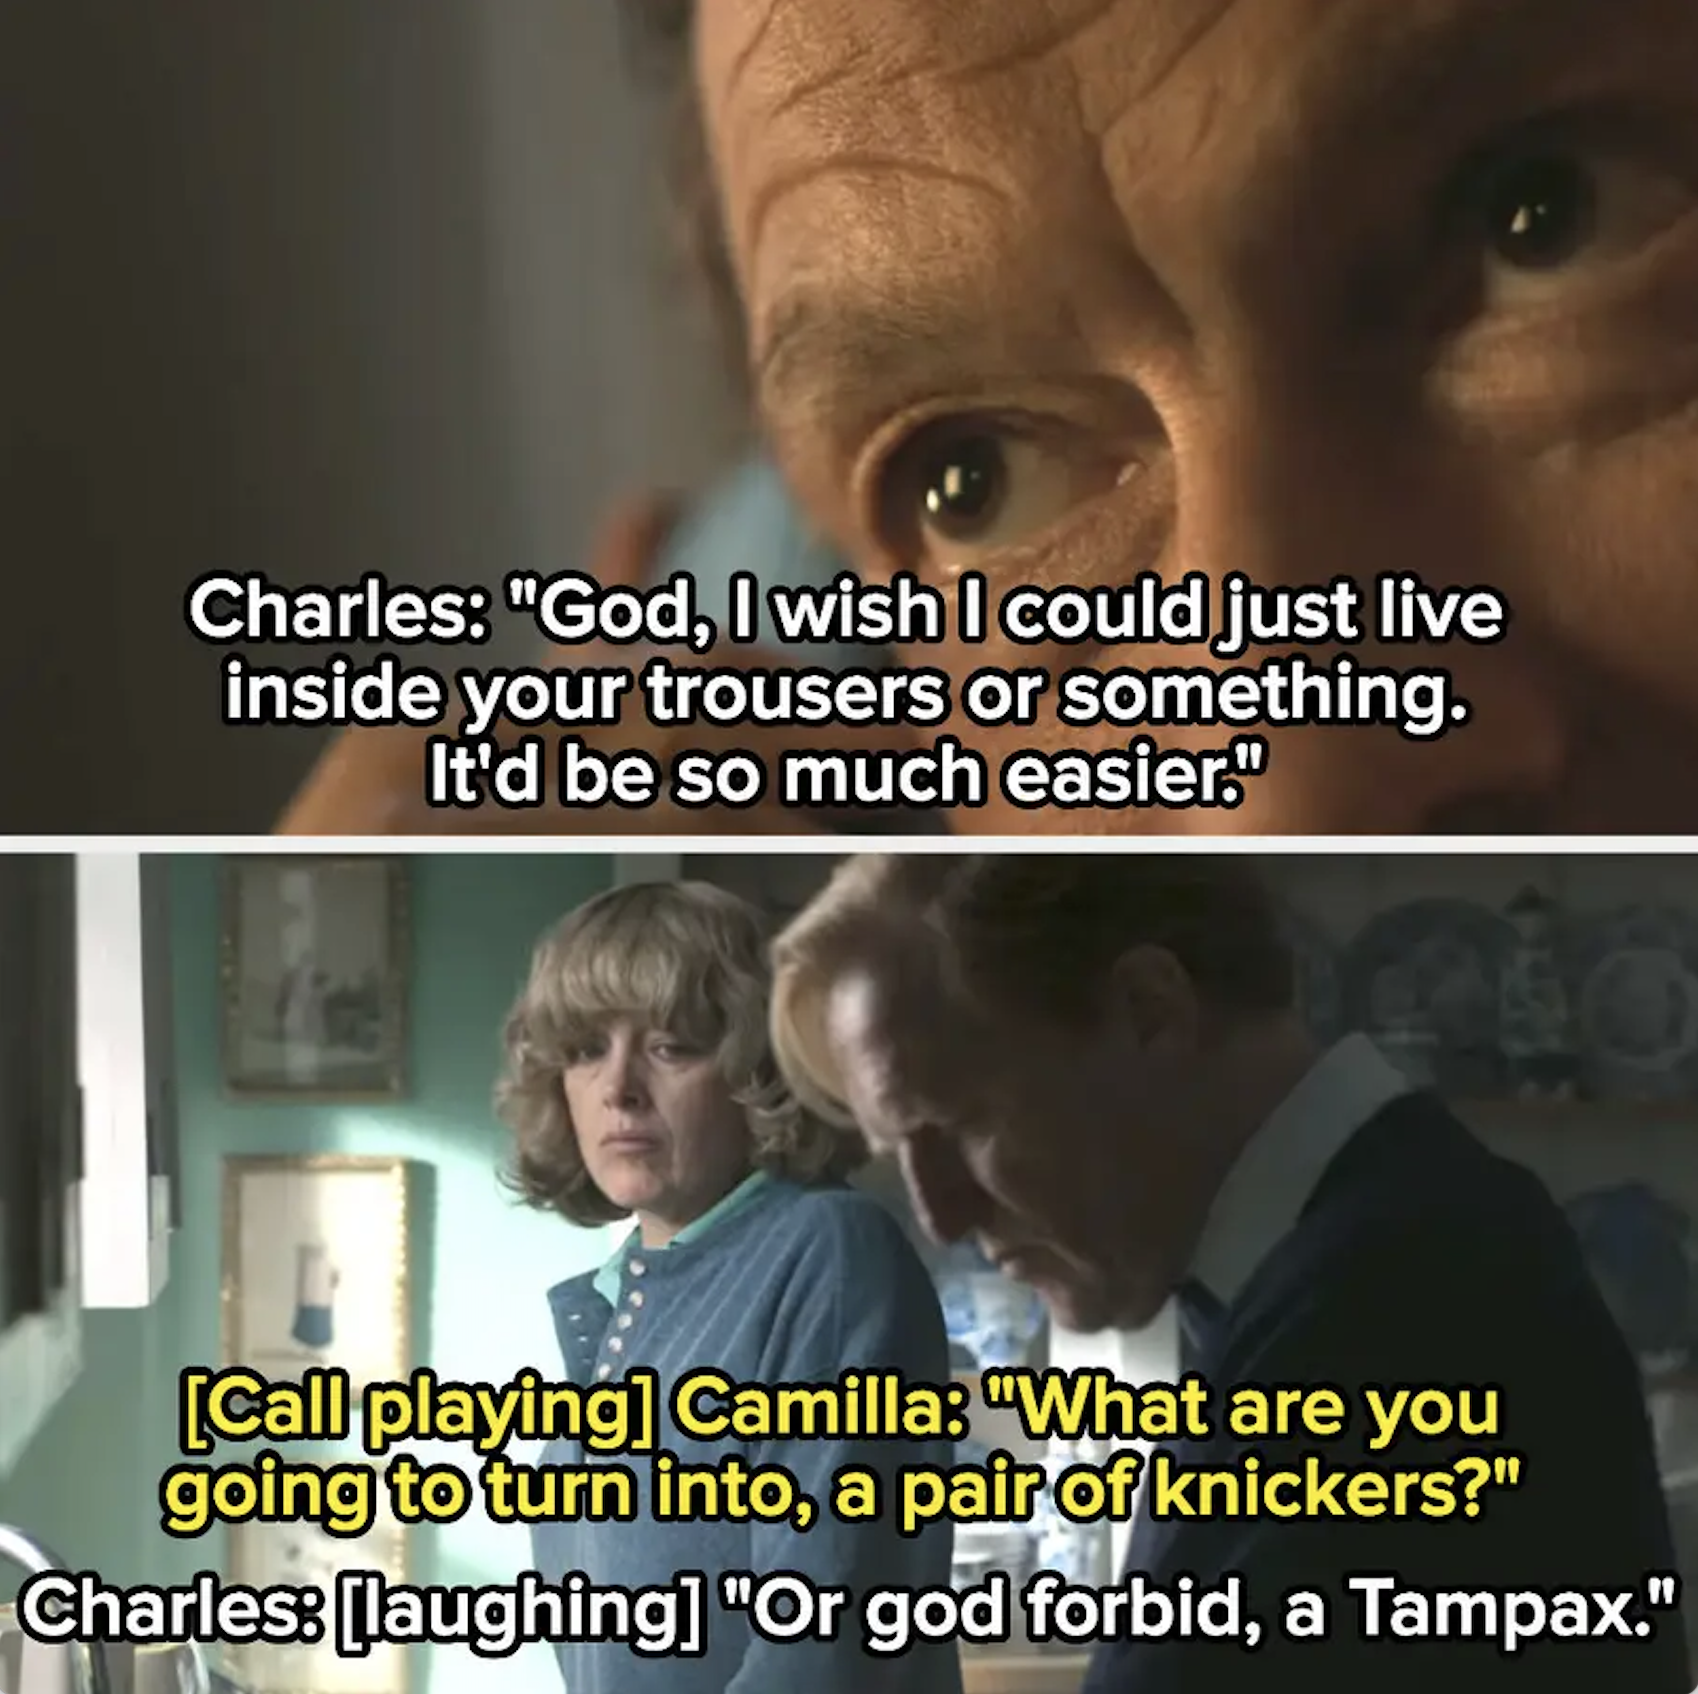 Charles: God, I wish I could just live insdie your trousers or something. it&#x27;d be so much easier. Camilla: What are you going to turn into, a pair of knickers? Charles: or god forbid, a Tampax